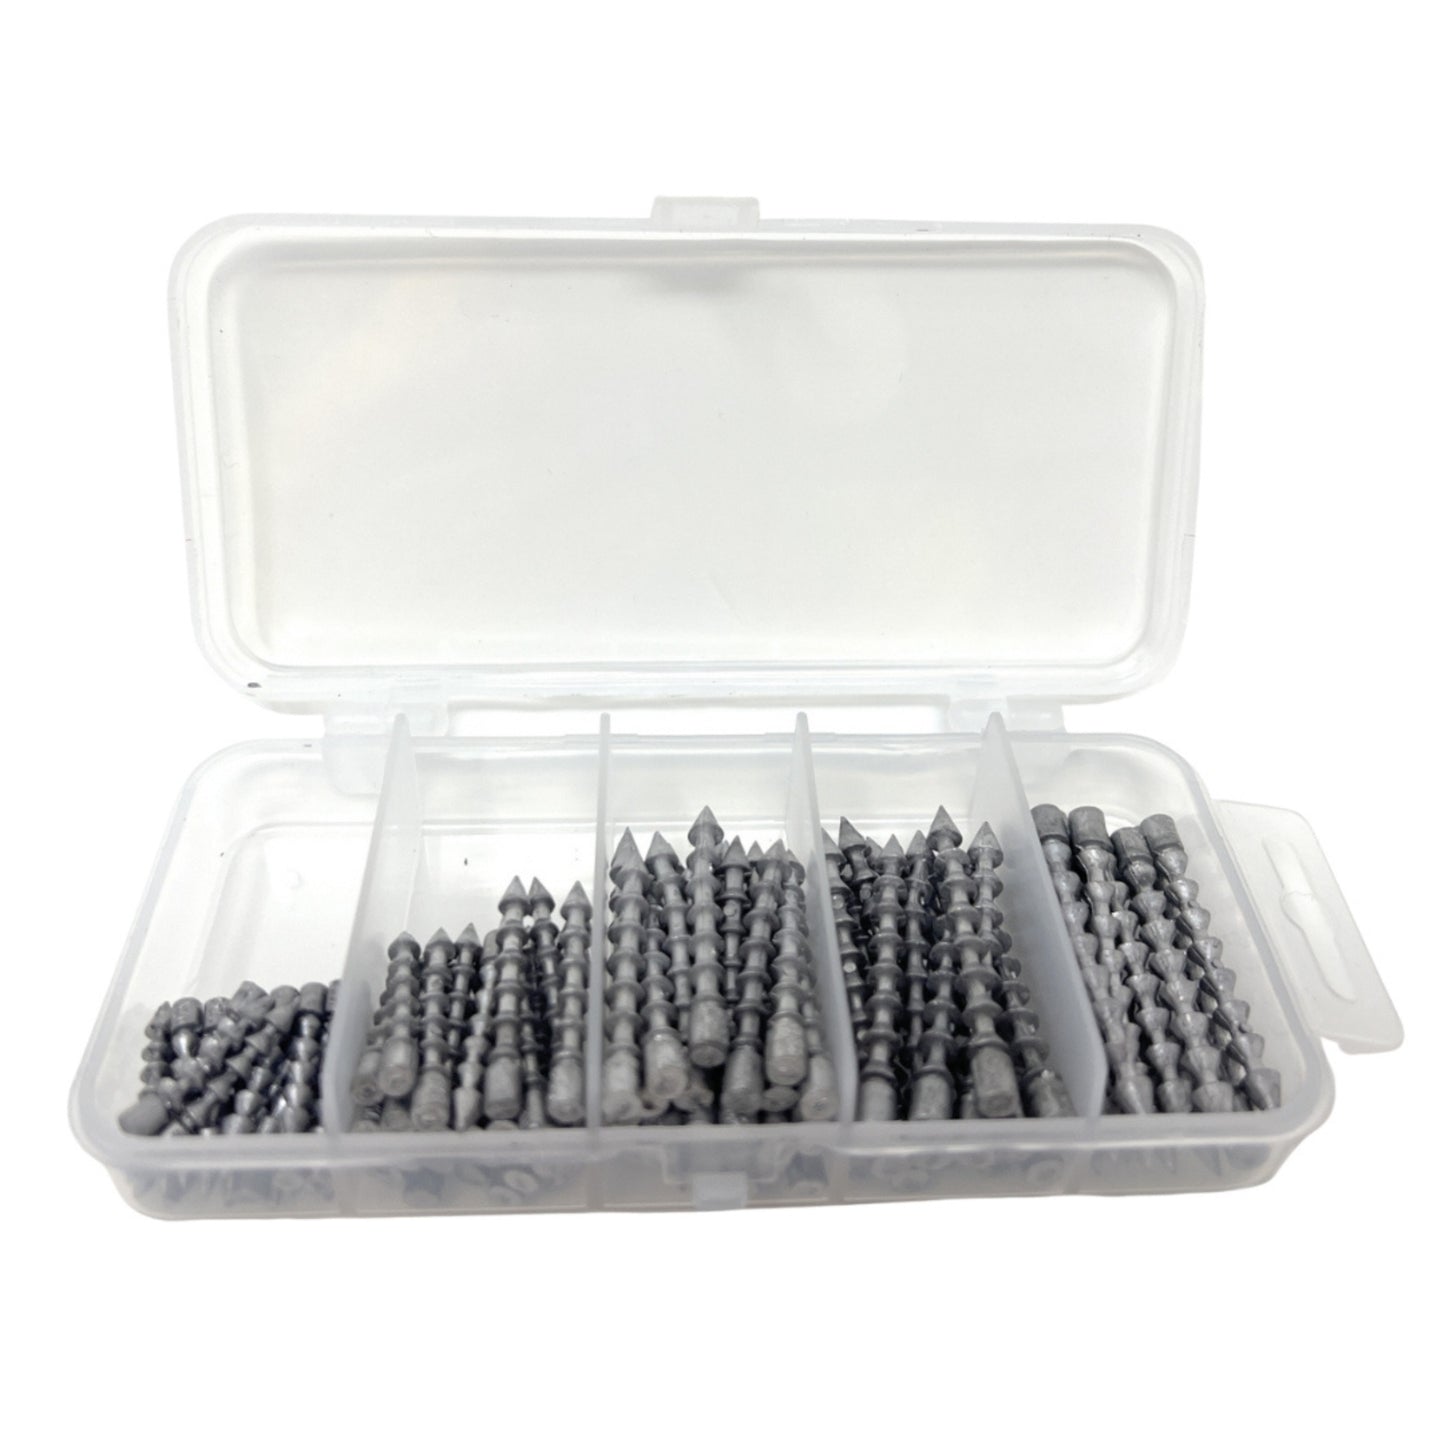 Reaction Tackle Lead Nail Weights/Insert Sinkers